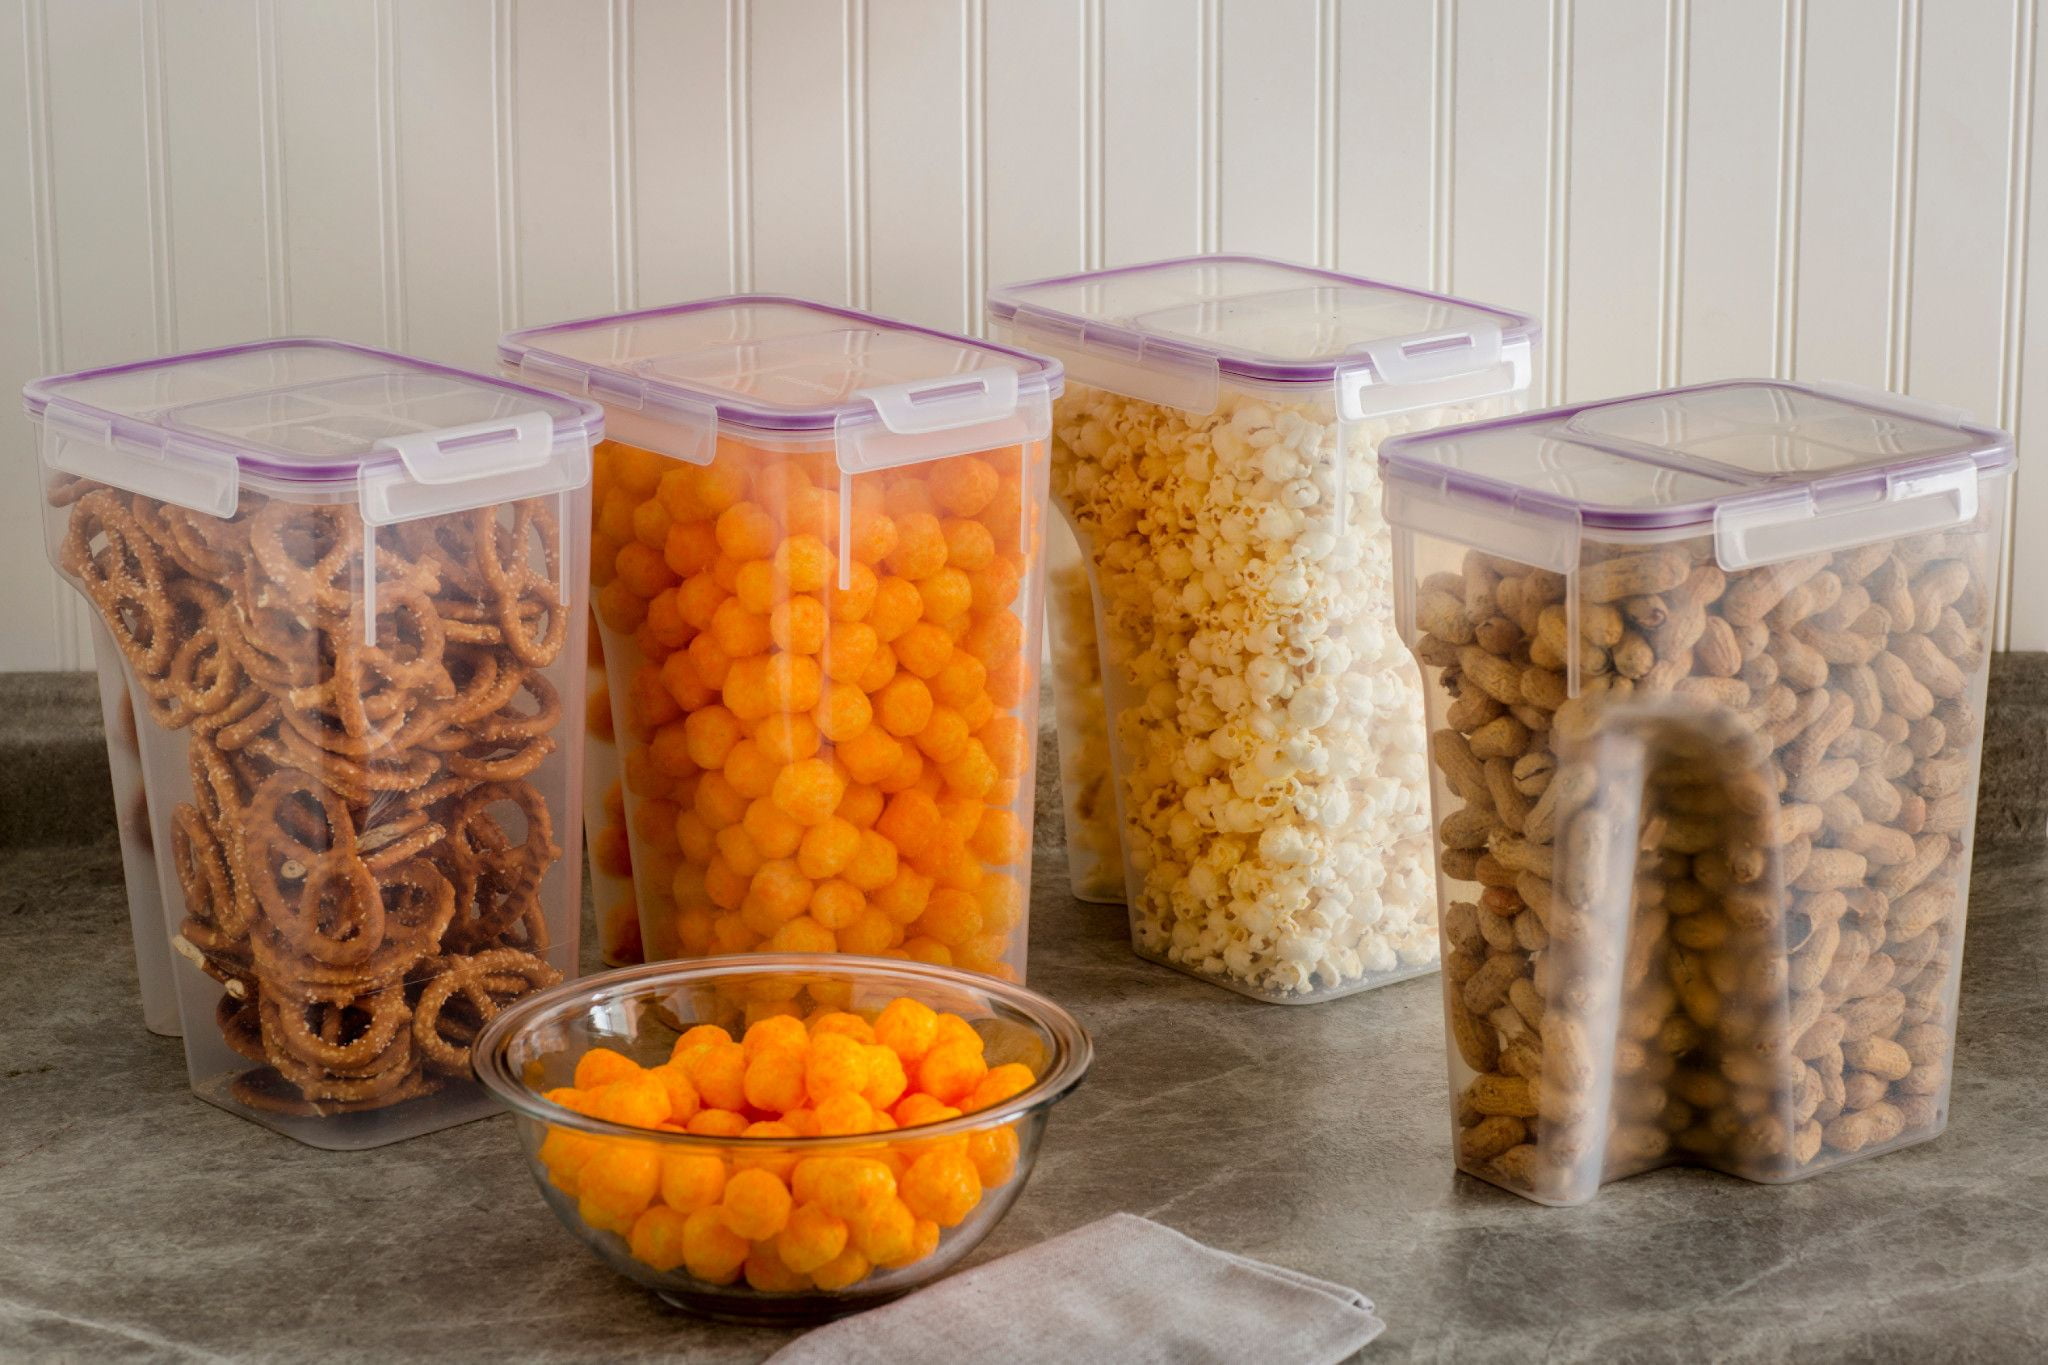 Snapware Airtight 2-Pack (22.8 Cup) Cereal Dispenser Storage Containers, Flip-Top Lid BPA Free, Plastic Containers for Cereal, Rice, Snack, Dry Food